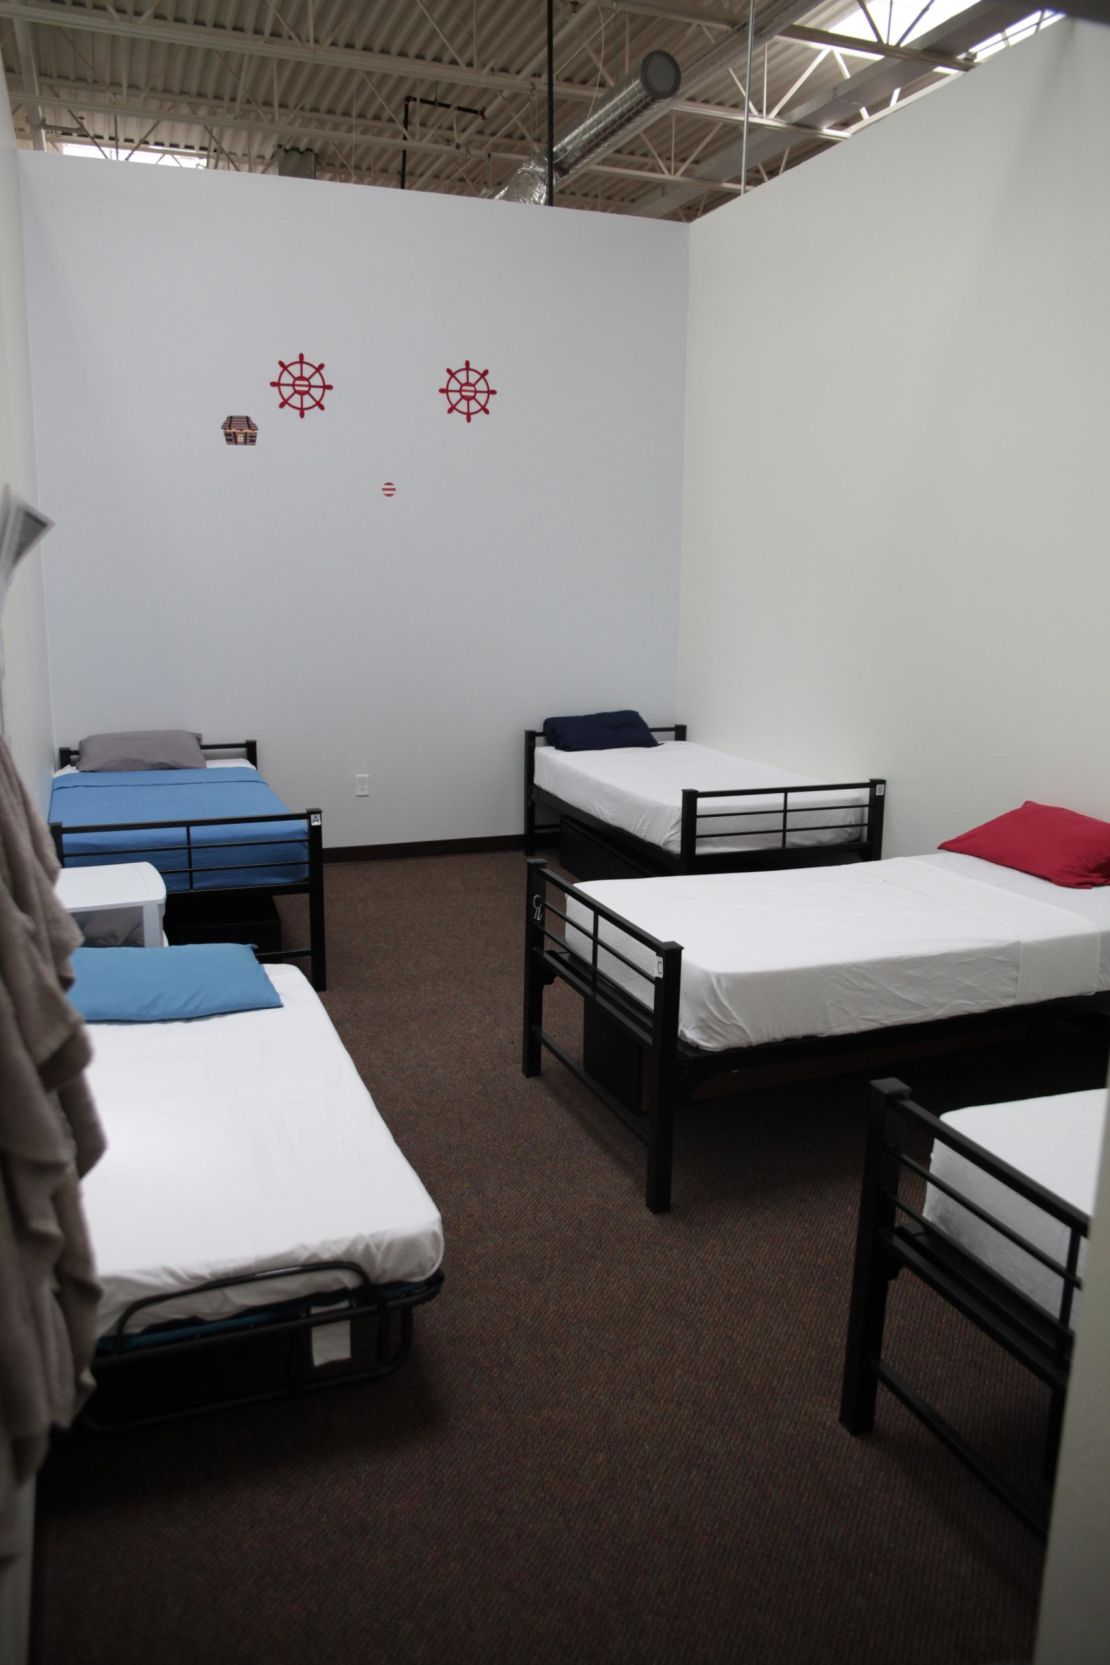 Beds stand at the ready at Casa Padre shelter in Brownsville, Texas, for immigrant children who have been separated from their families.